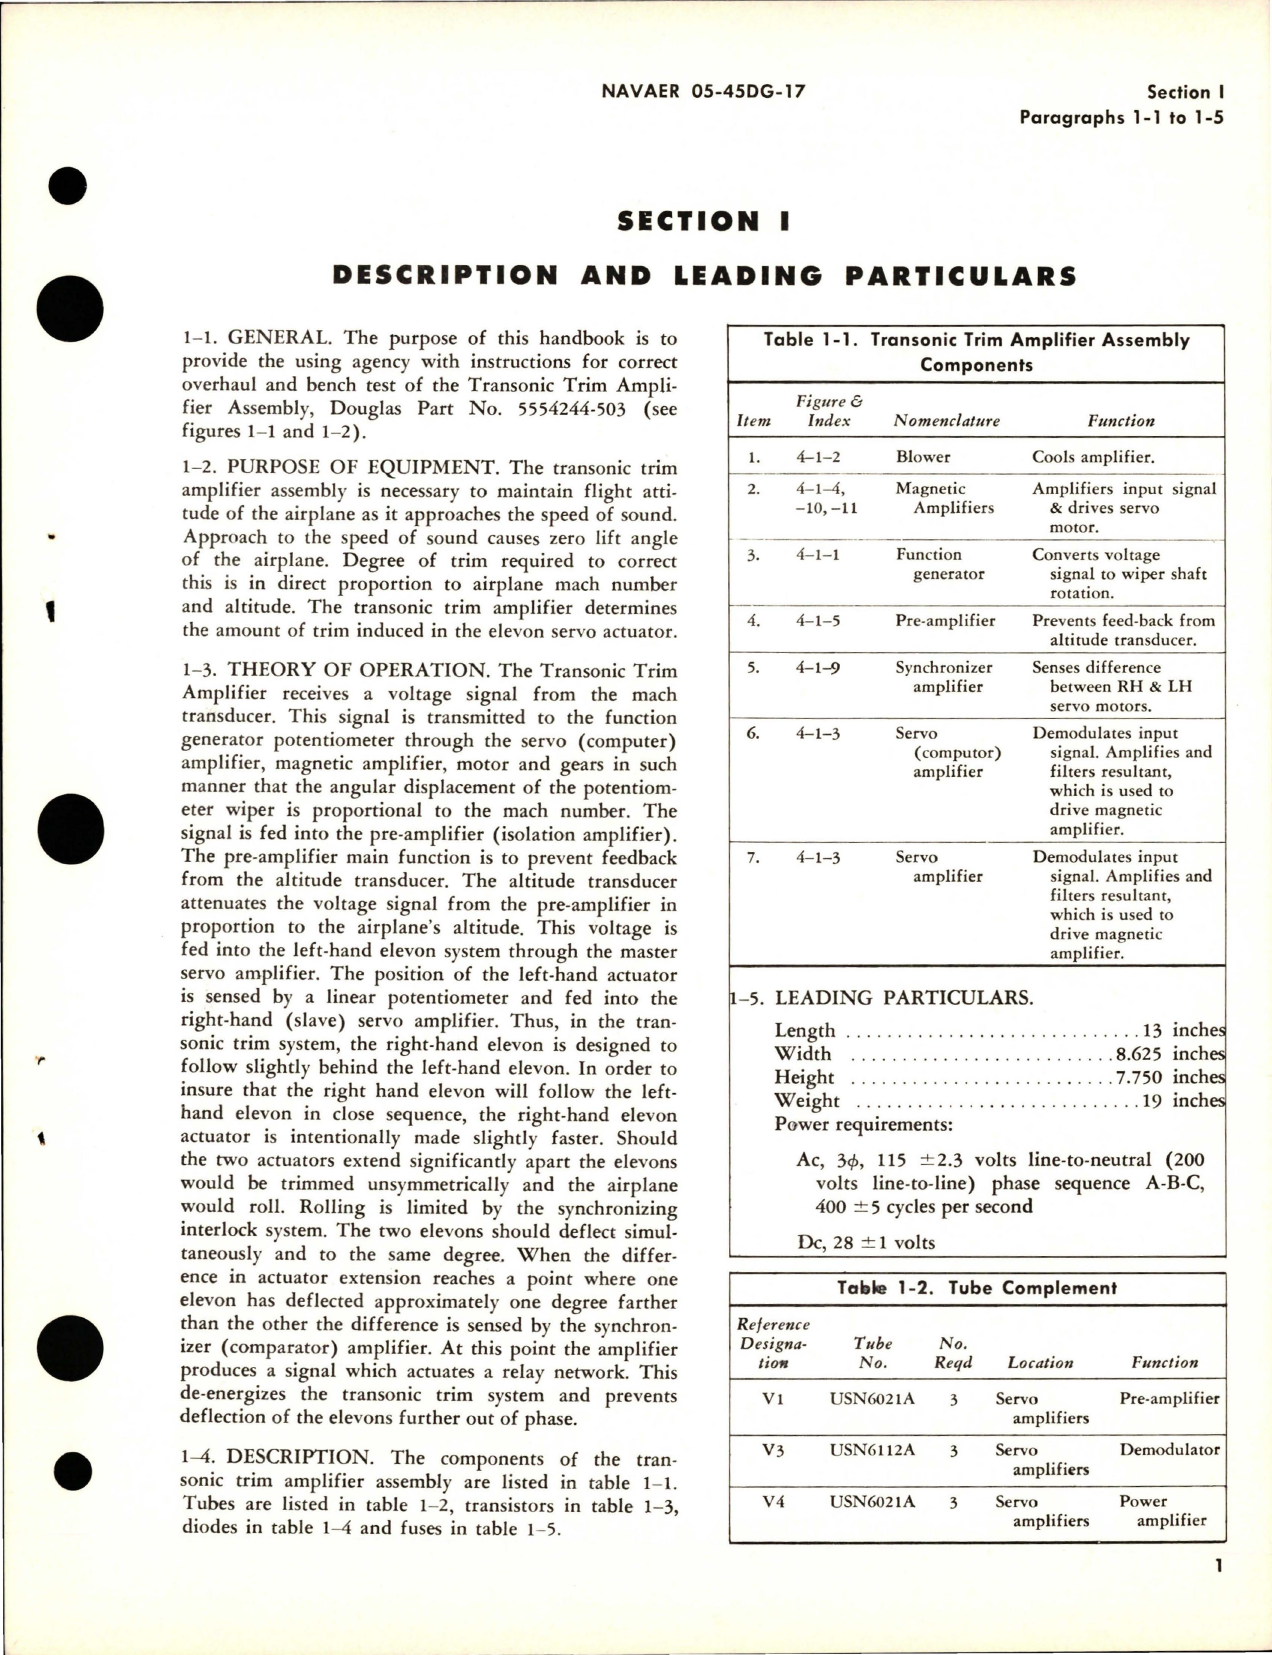 Sample page 9 from AirCorps Library document: Overhaul Instructions for Transonic Trim Amplifier Assembly - Parts 5554244-503, 5554244-507, and 554244-509